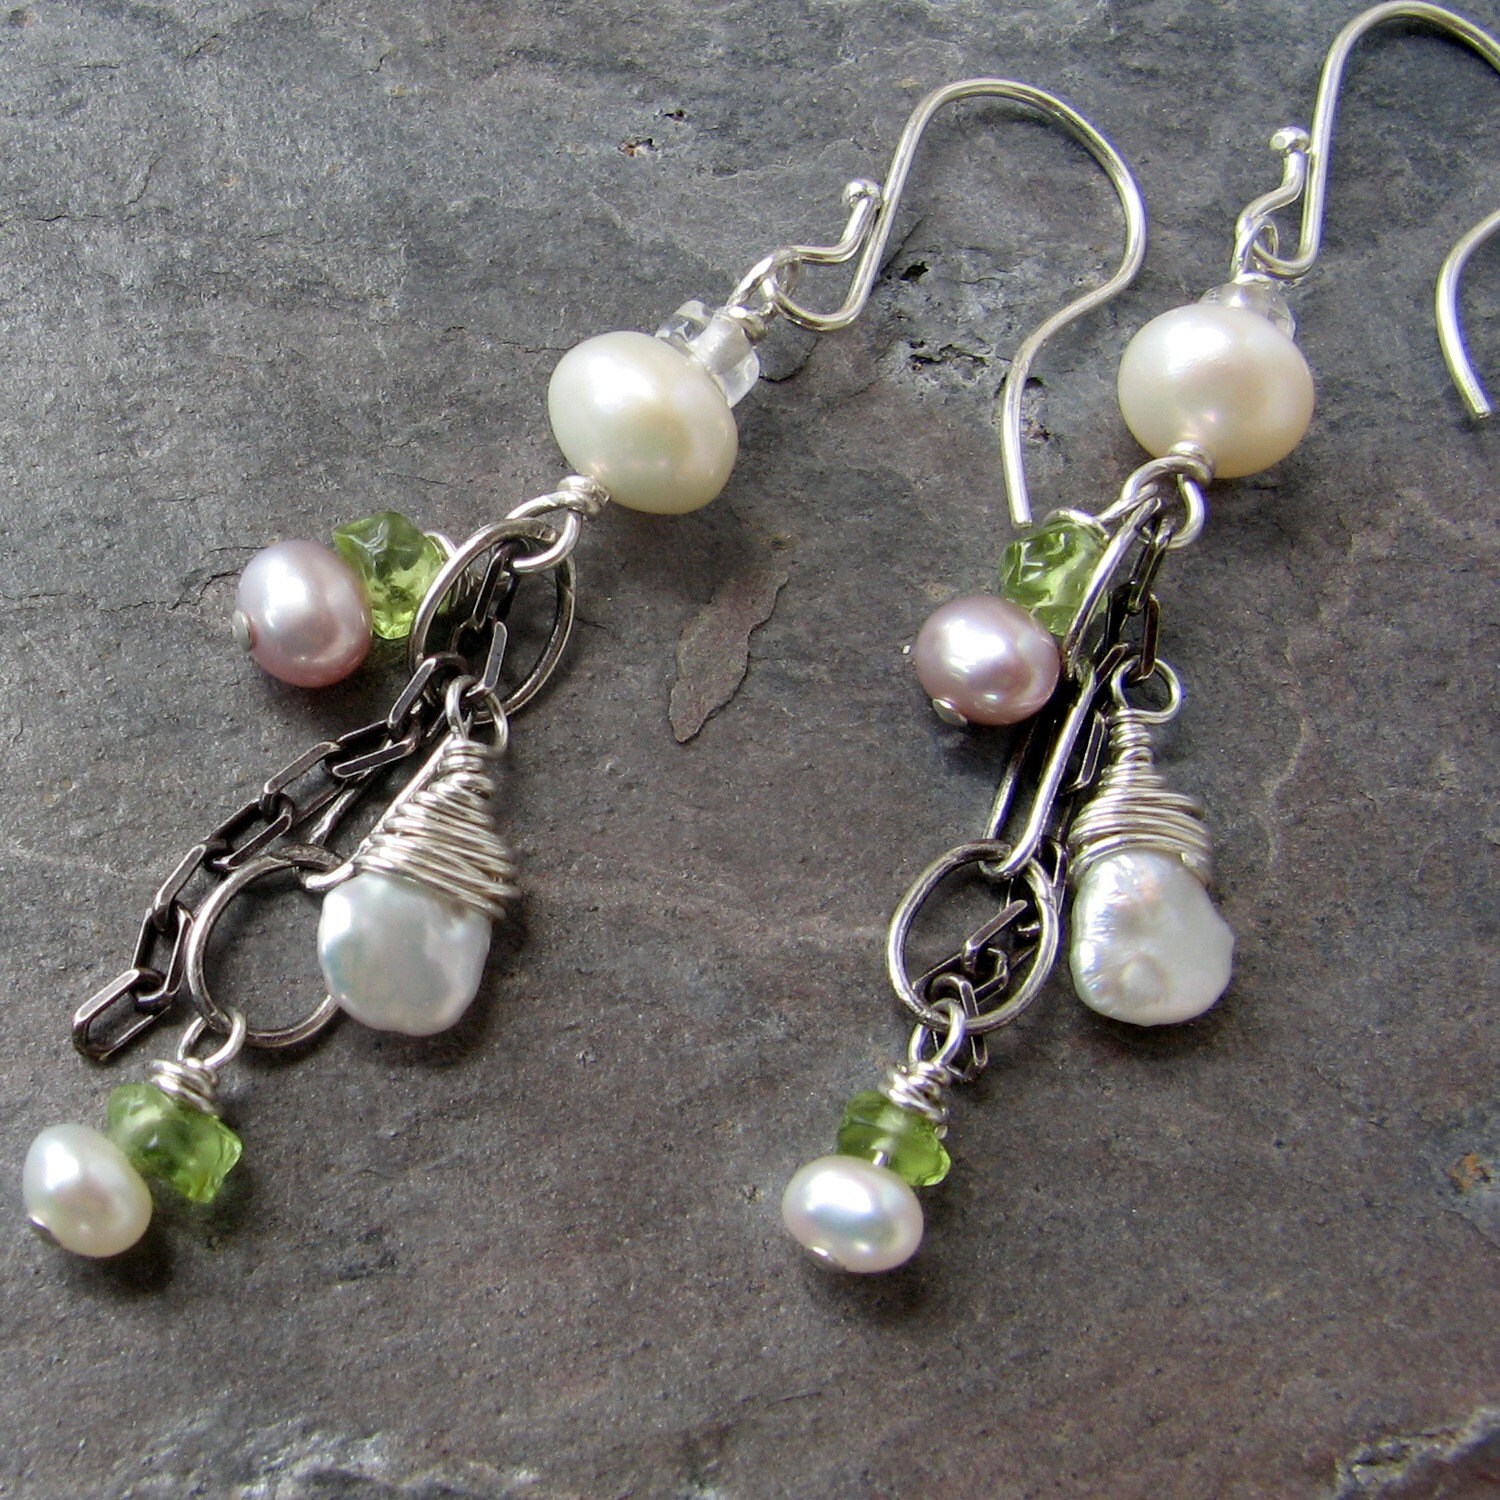 Lacey Pearls sterling earrings by LibertyOriginals on Etsy